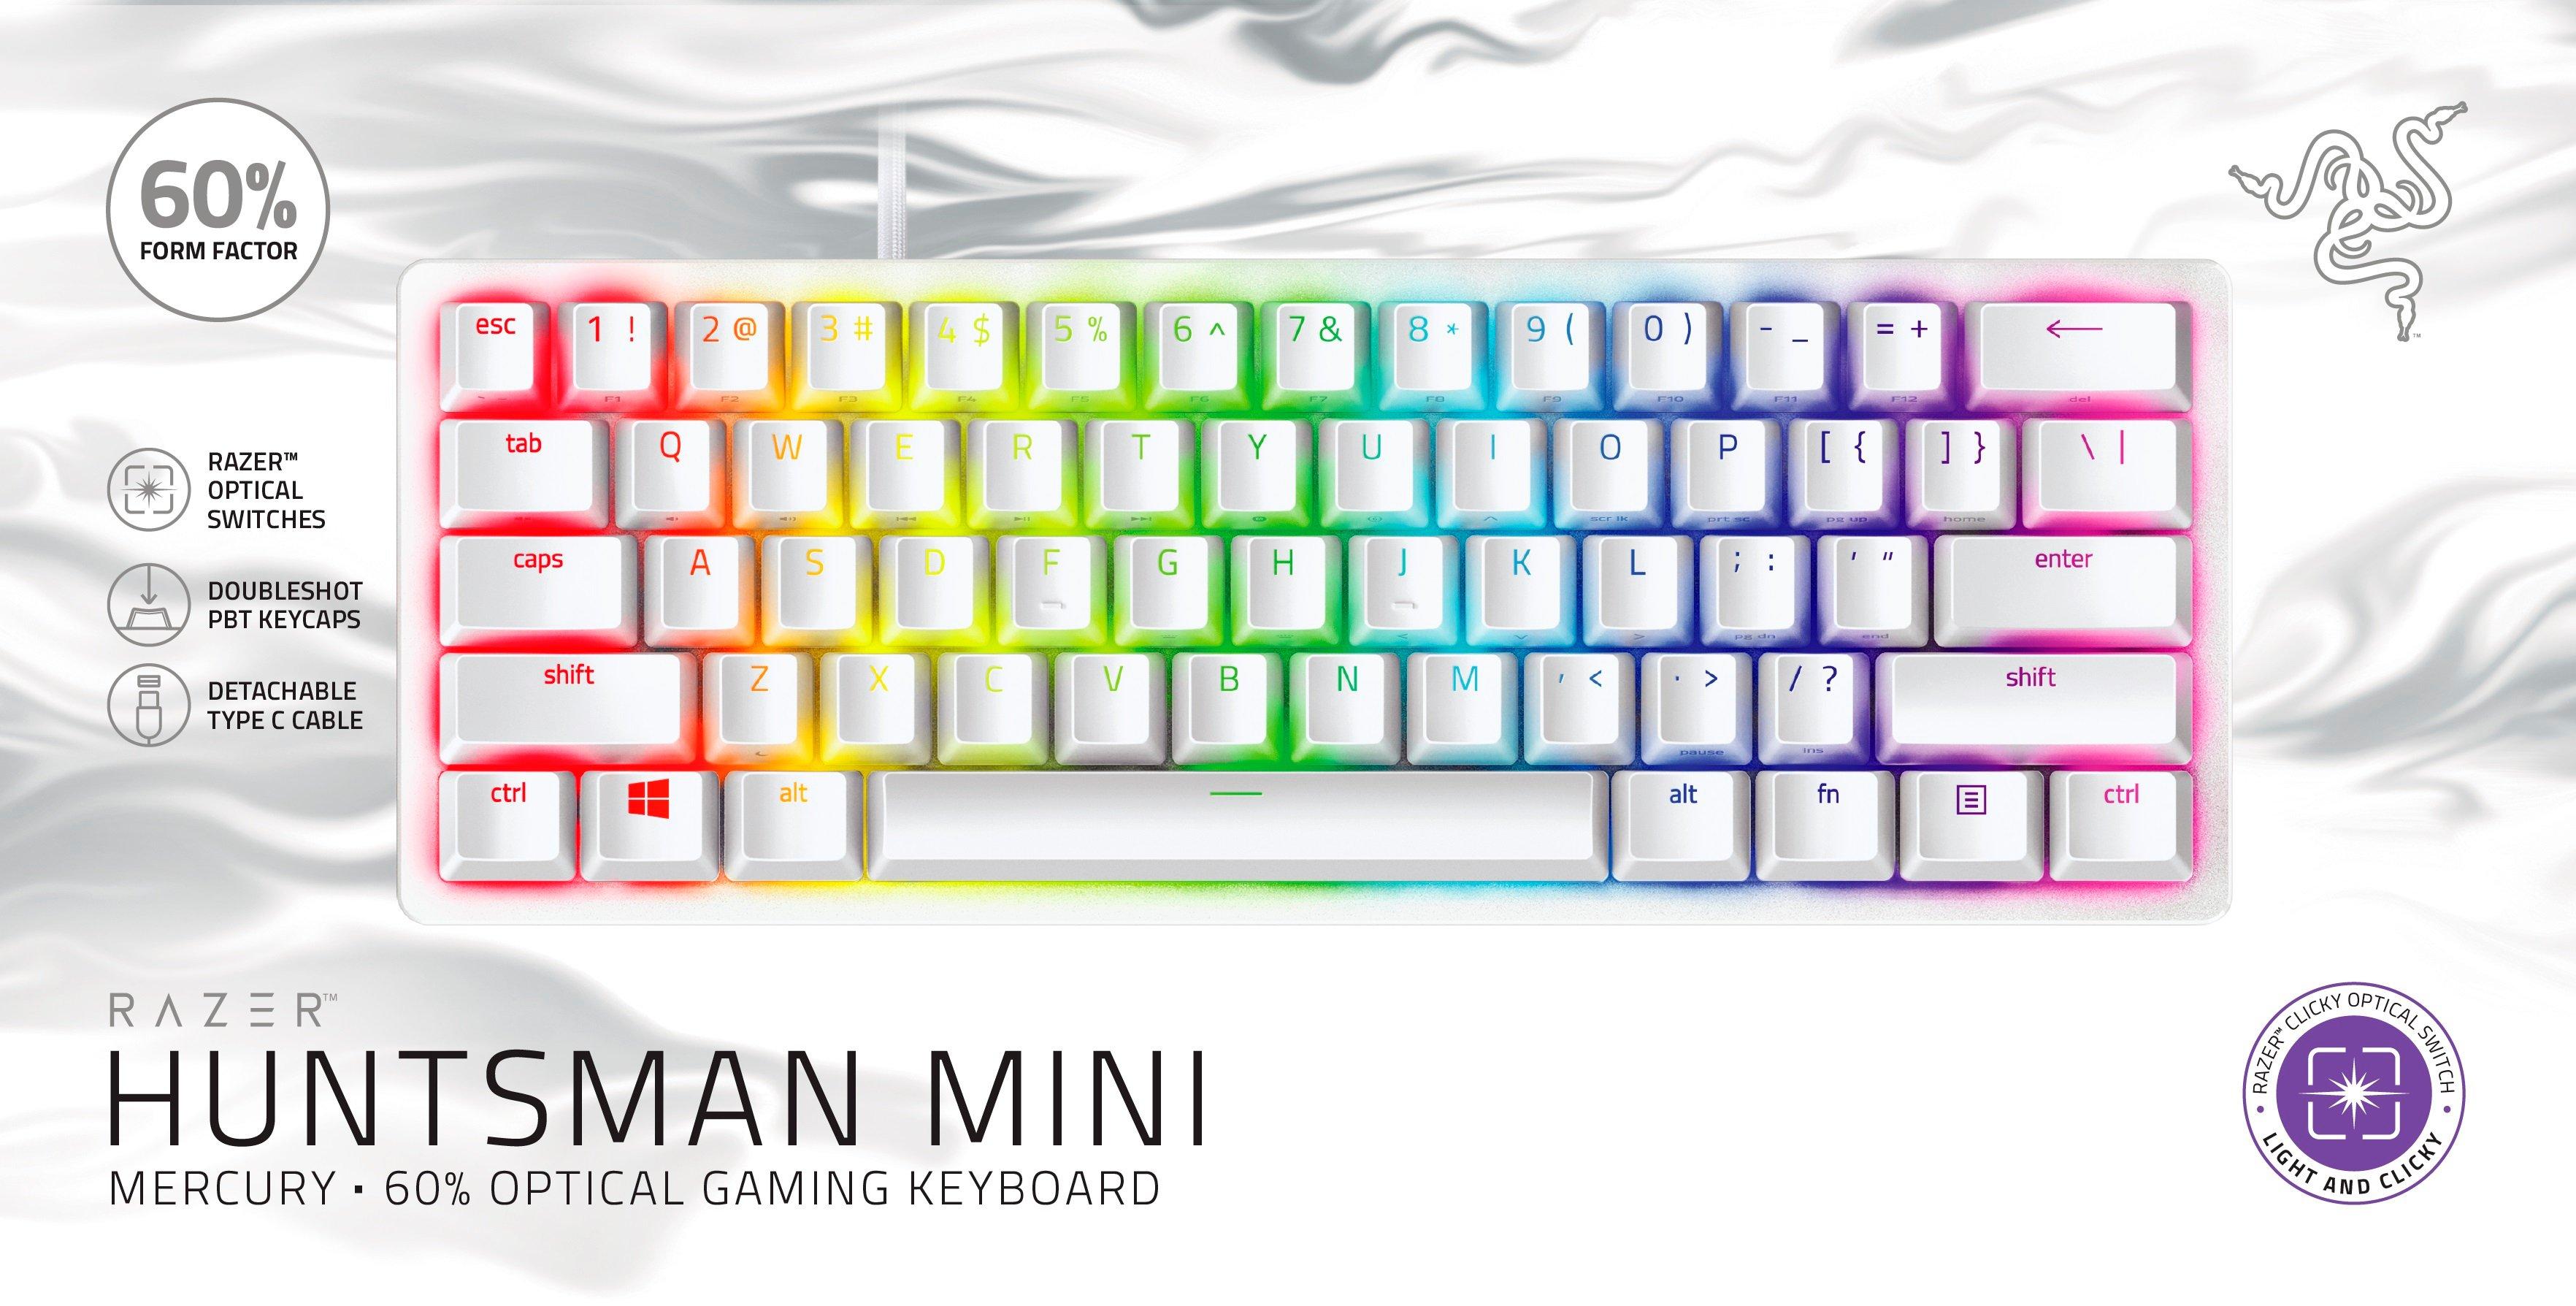 Razer Huntsman Mini 60 Percent Wired Optical Clicky Switch Gaming Keyboard  with Chroma RGB Backlighting, PBT Keycaps, Mechanical Keyboards for PC